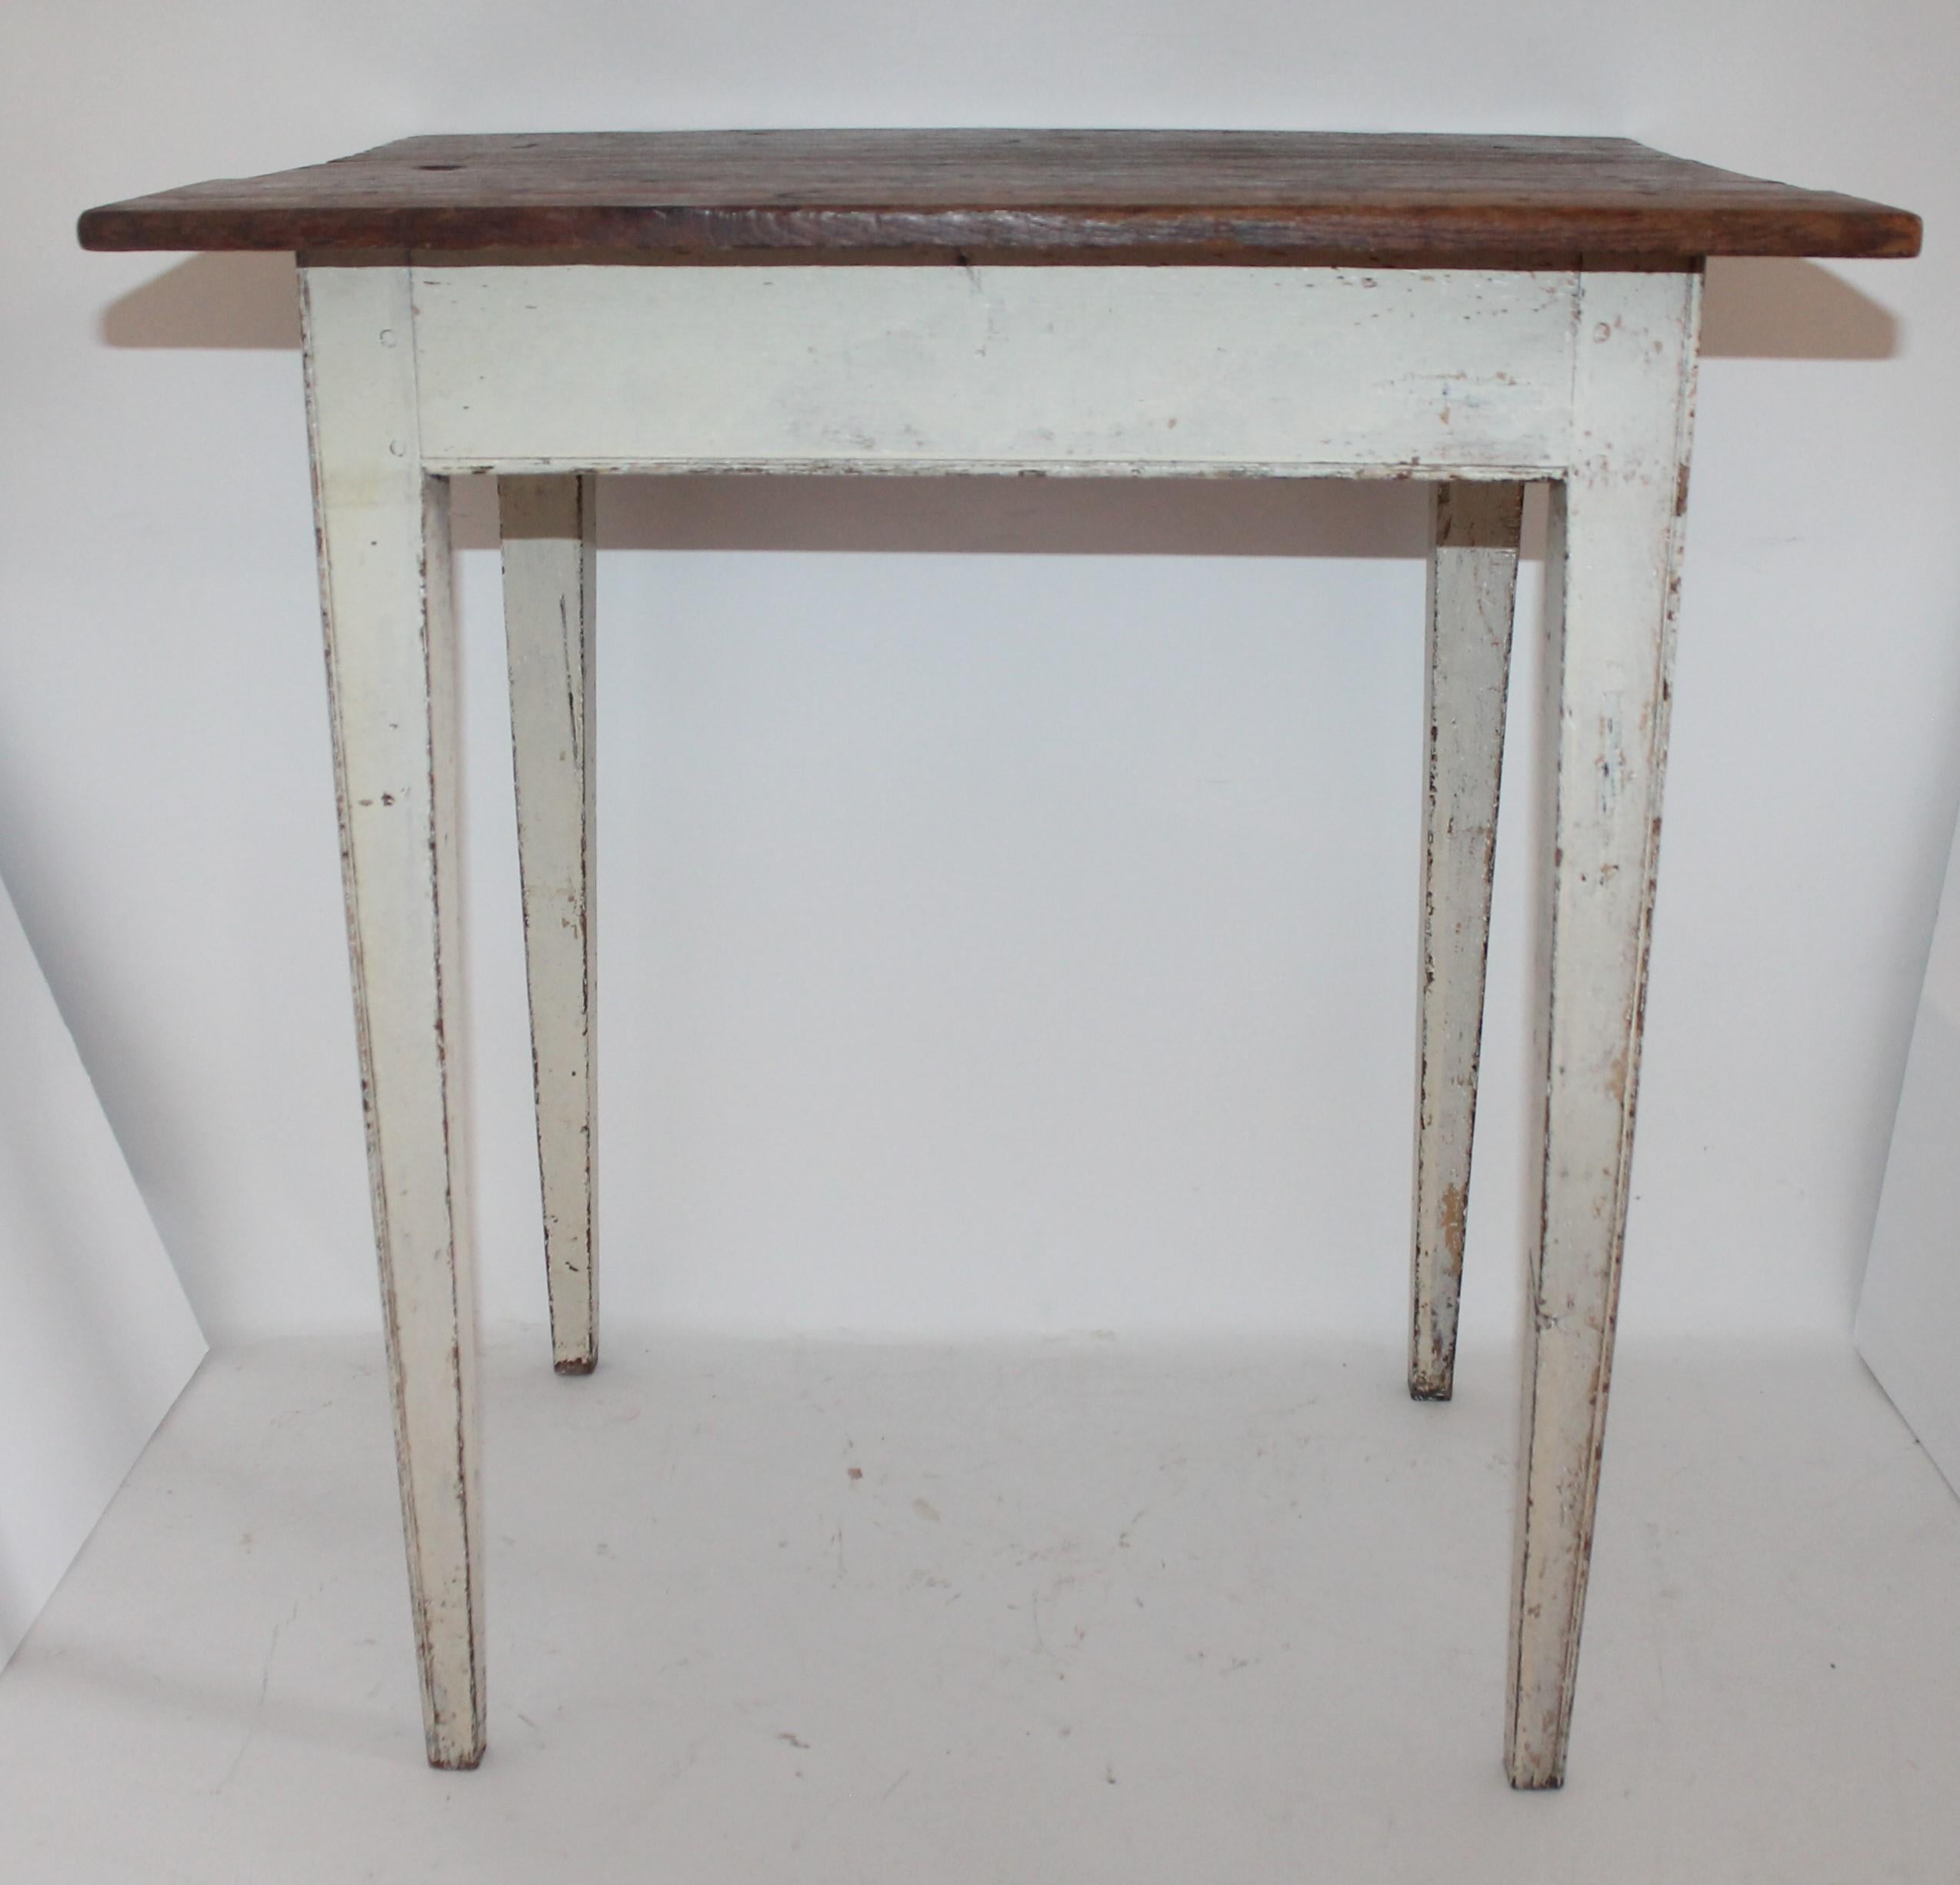 This folky country original white painted taper leg side table is in good and sturdy condition. This three board top is a scrub top and in walnut wood.